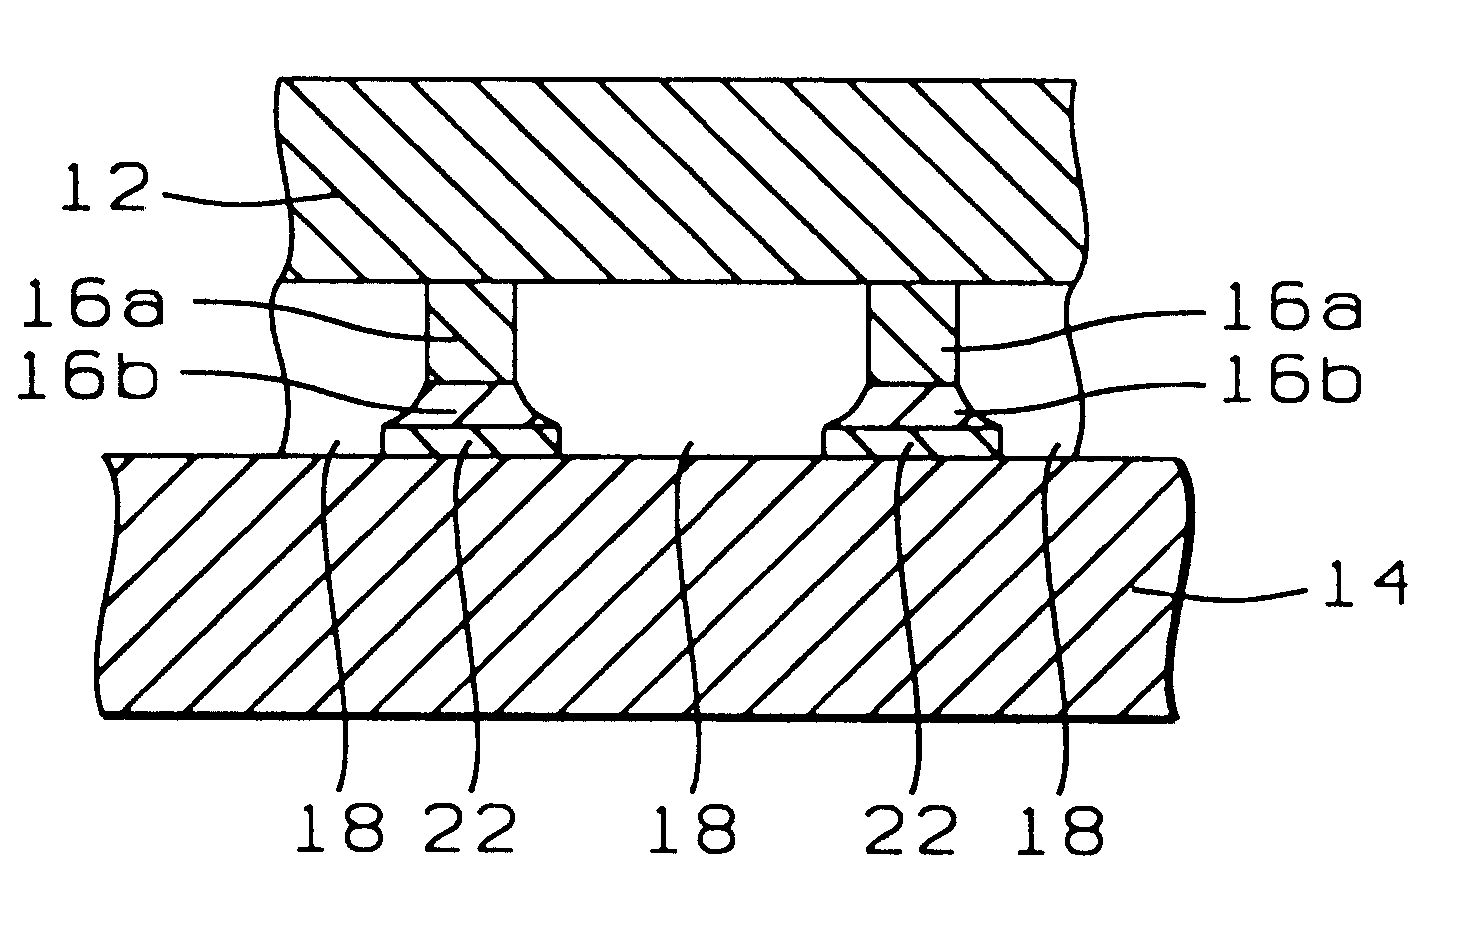 Pillar connections for semiconductor chips and method of manufacture